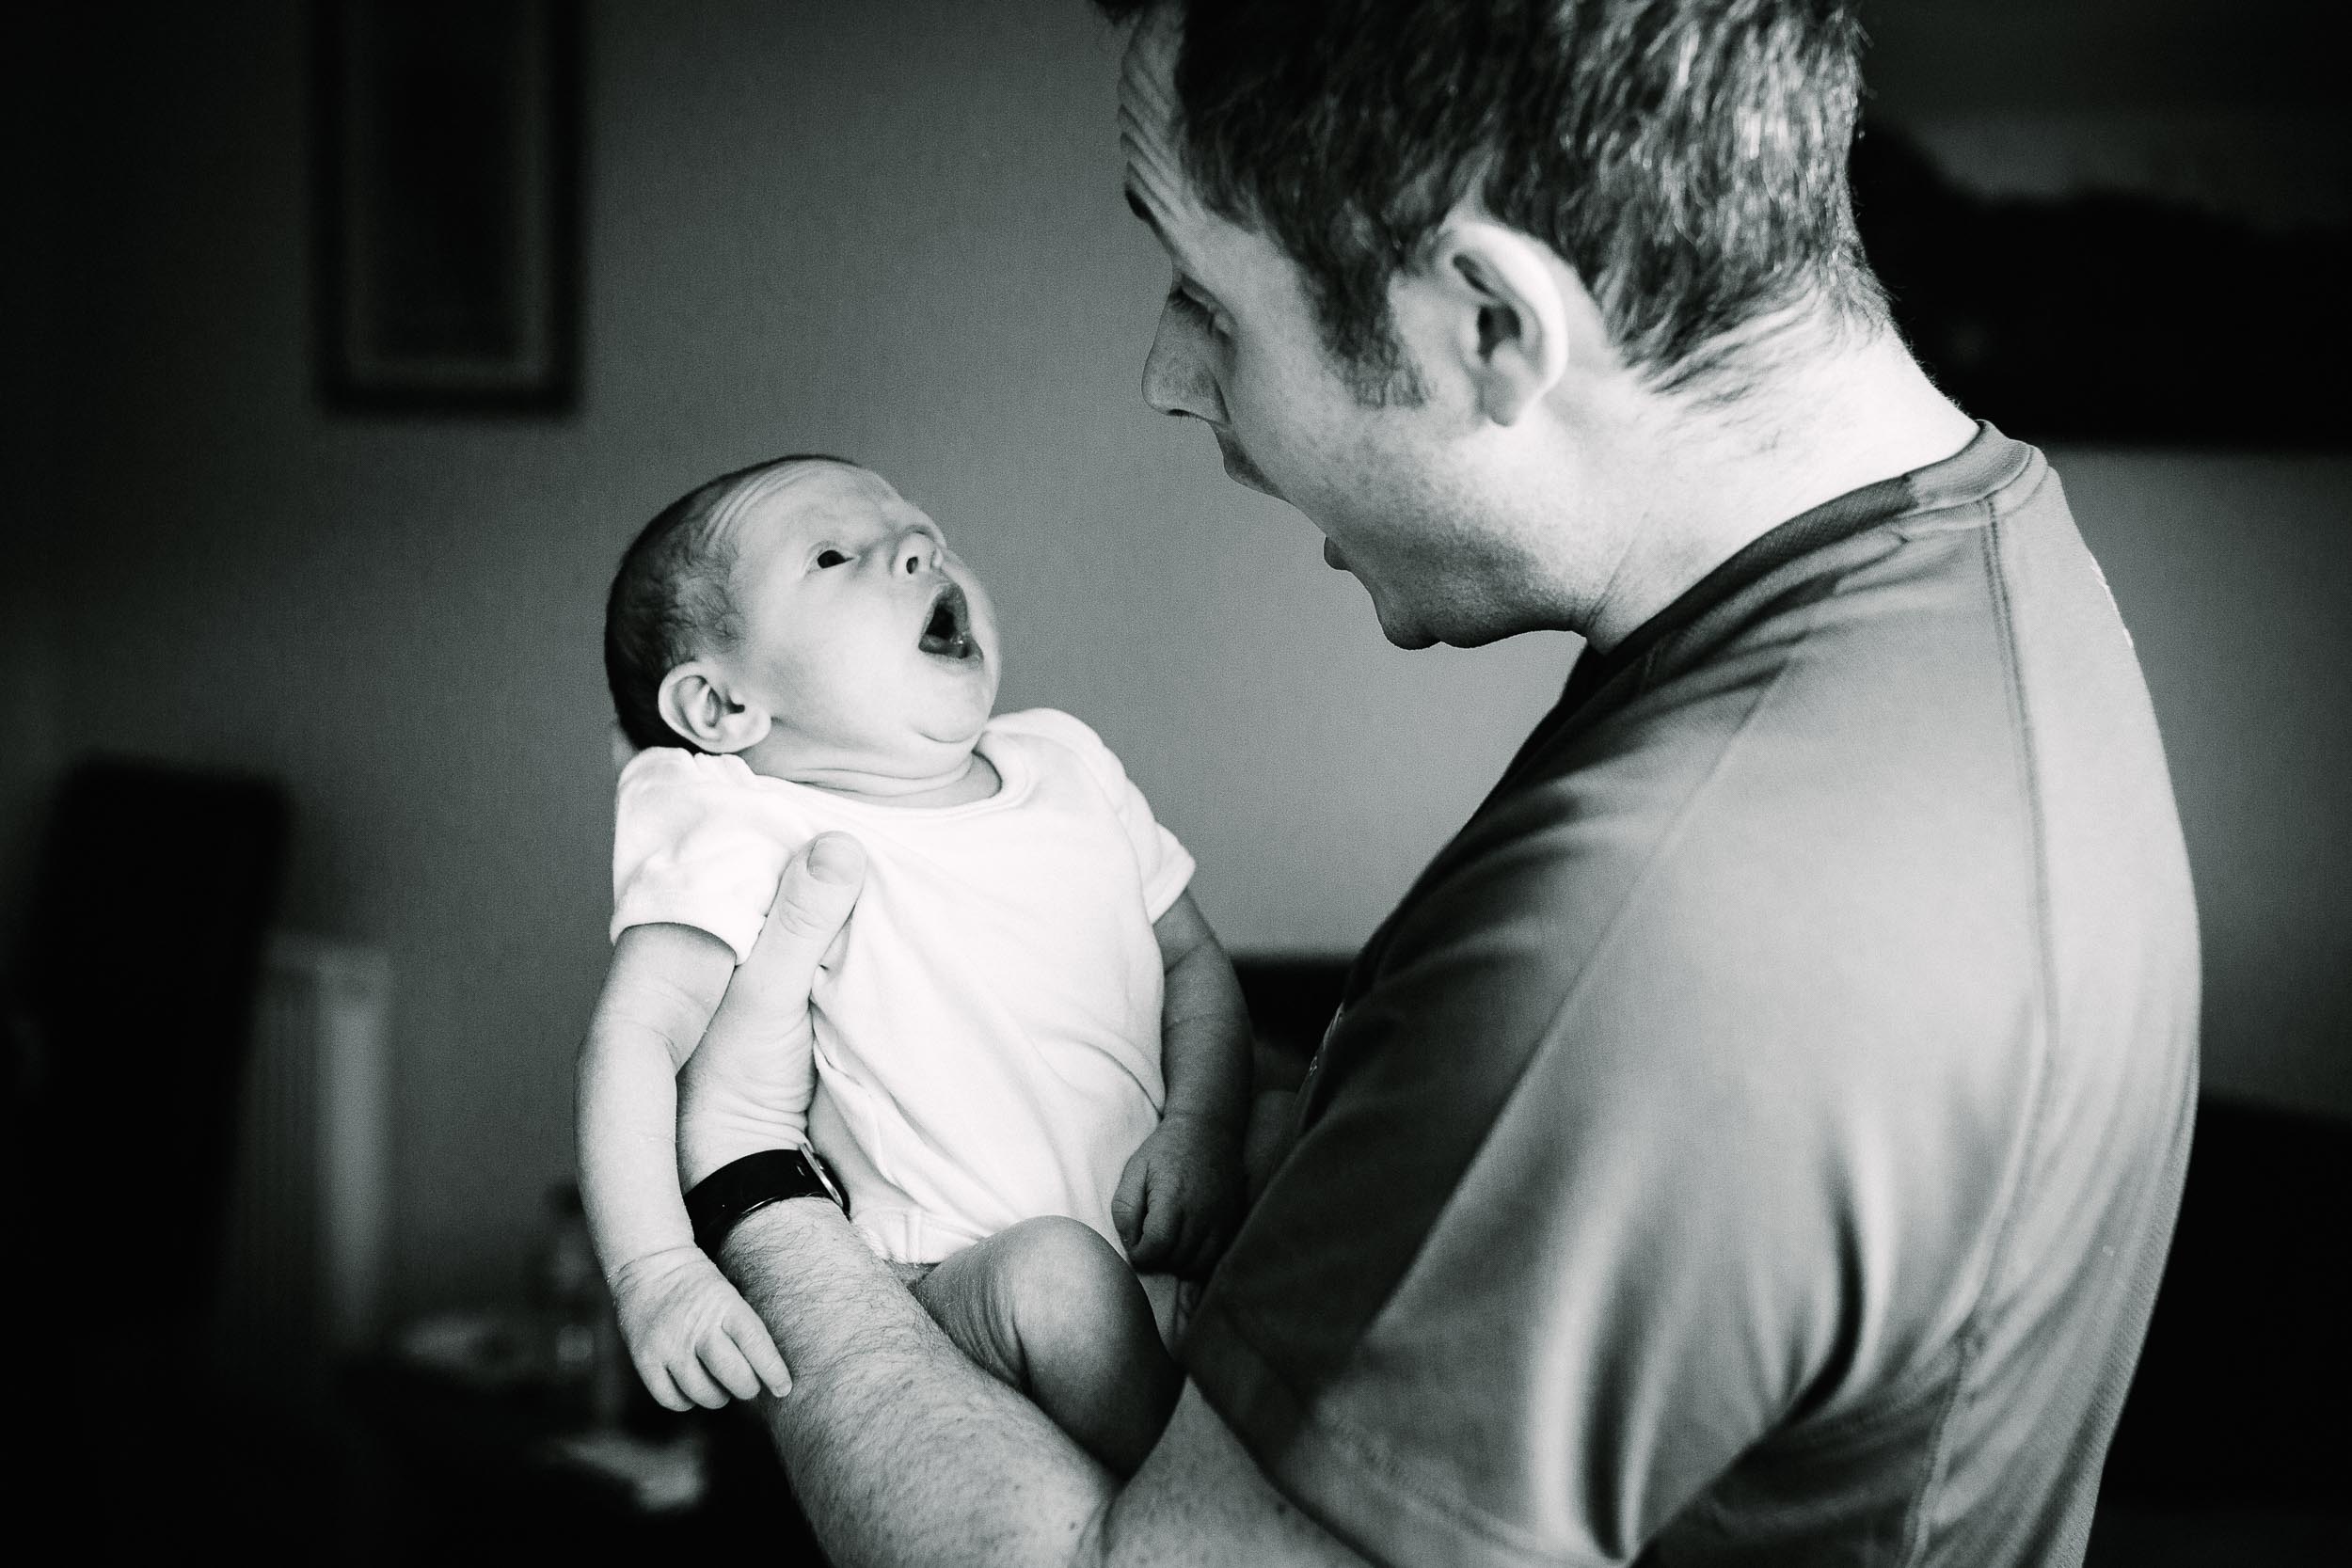 Newborn baby yawning | Story of the photo | Father and son